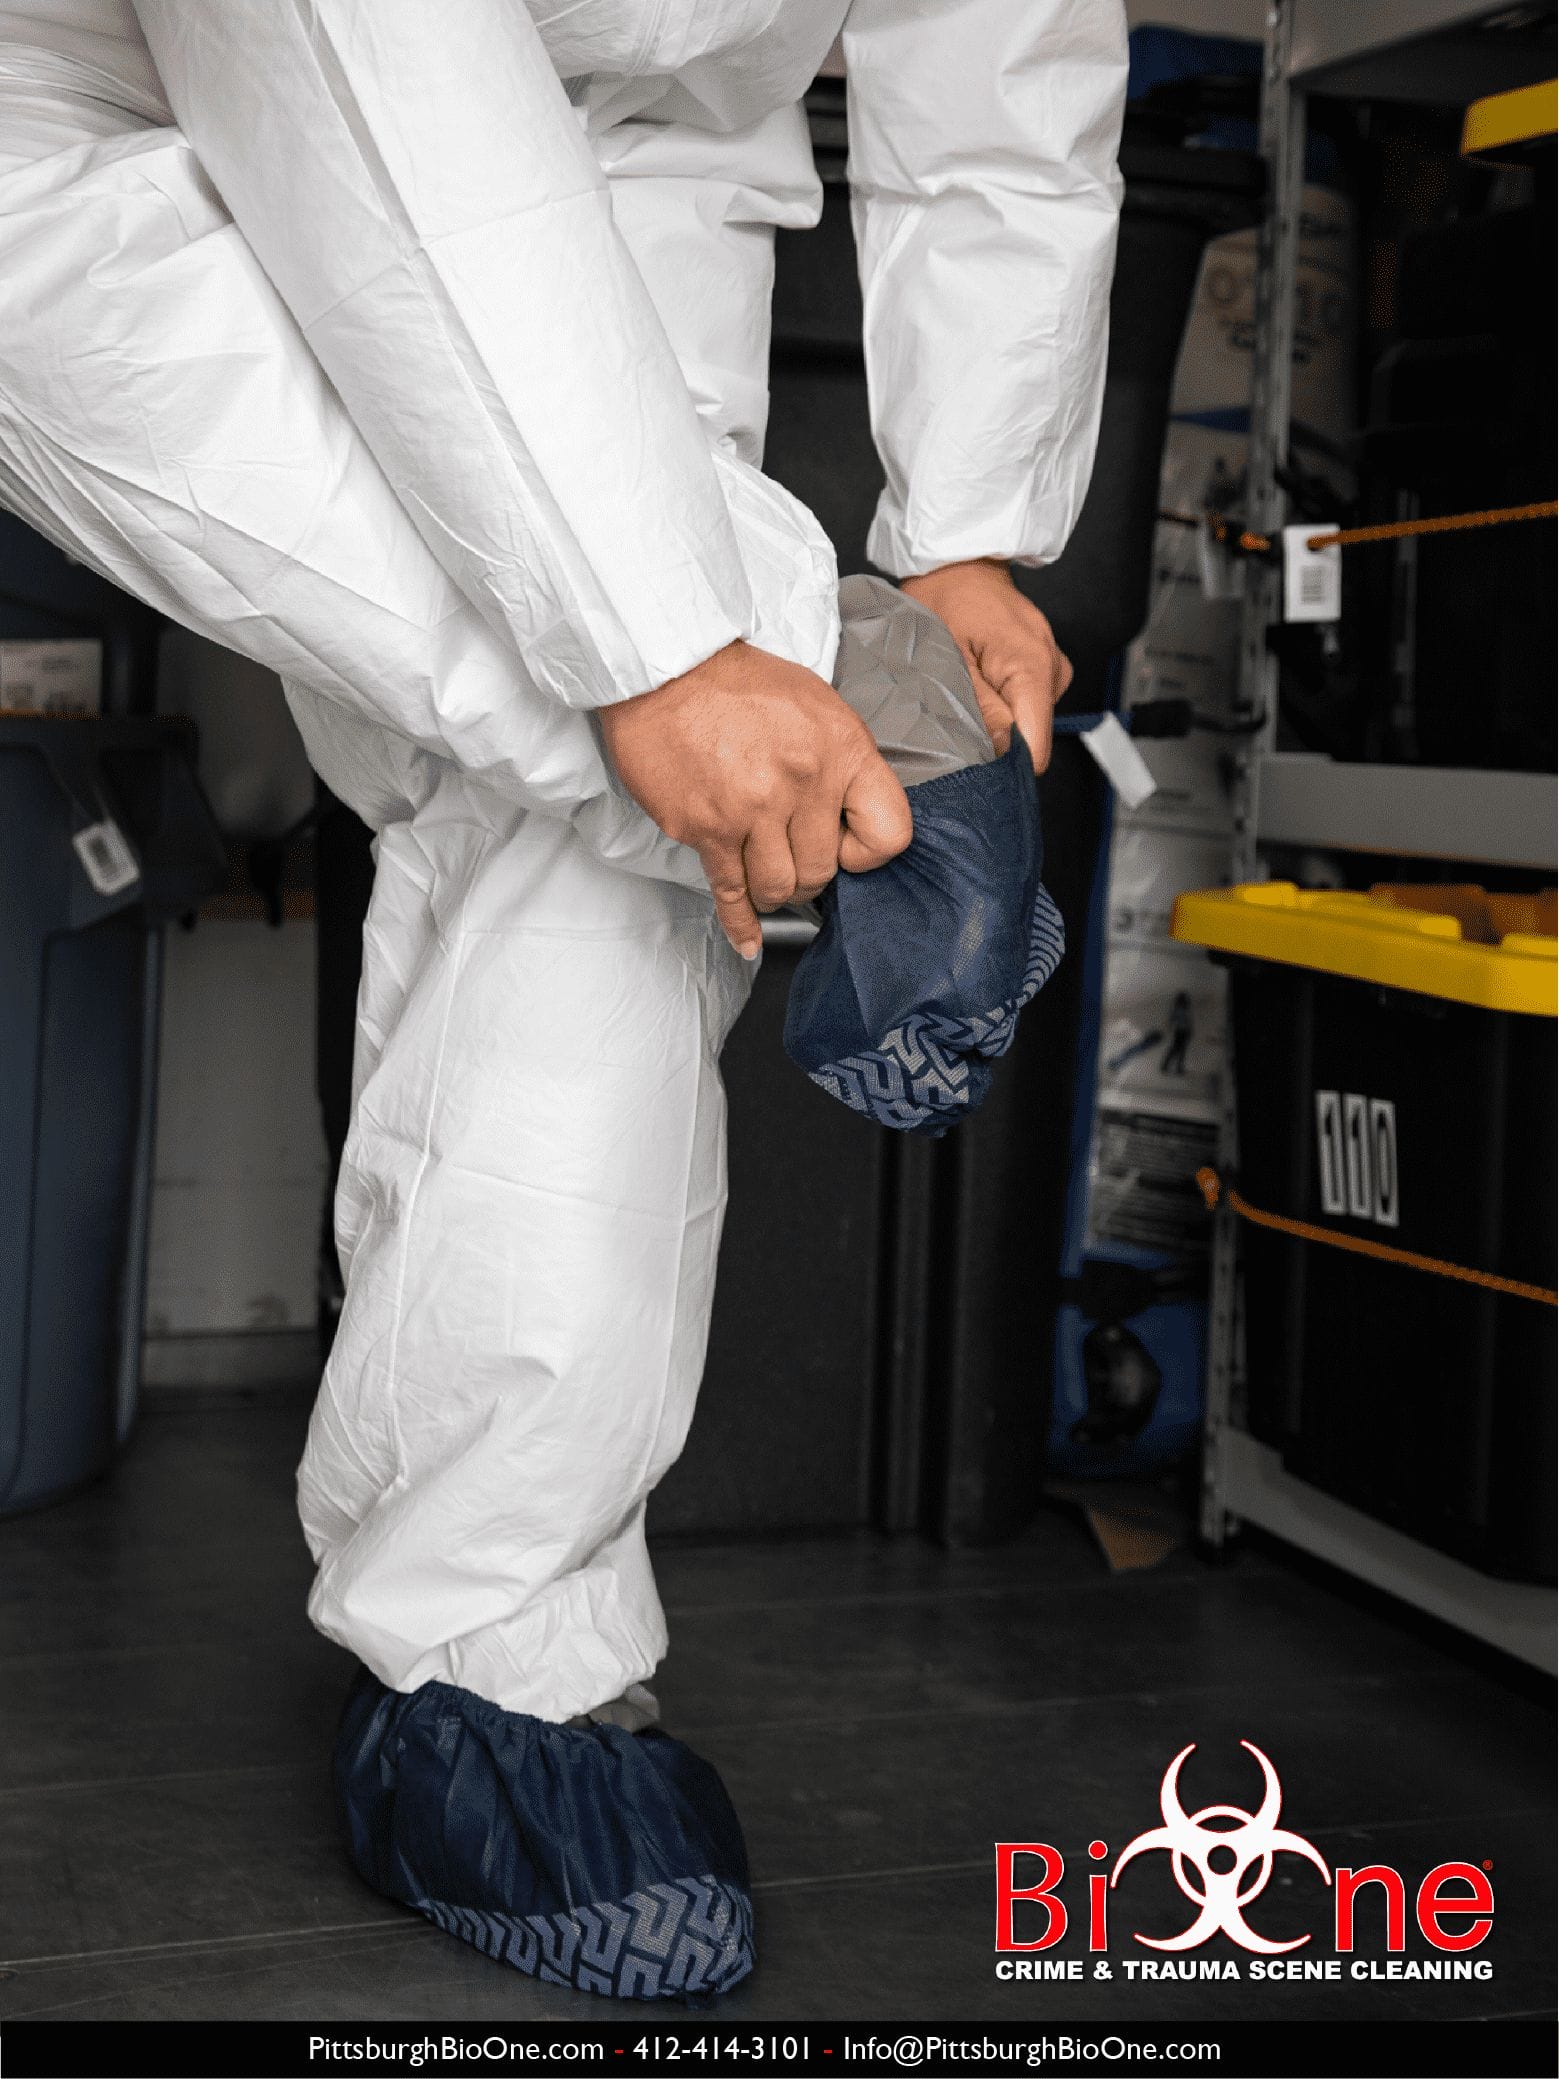 Image shows Bio-One technician gearing up with PPE (hazmat and shoewear).